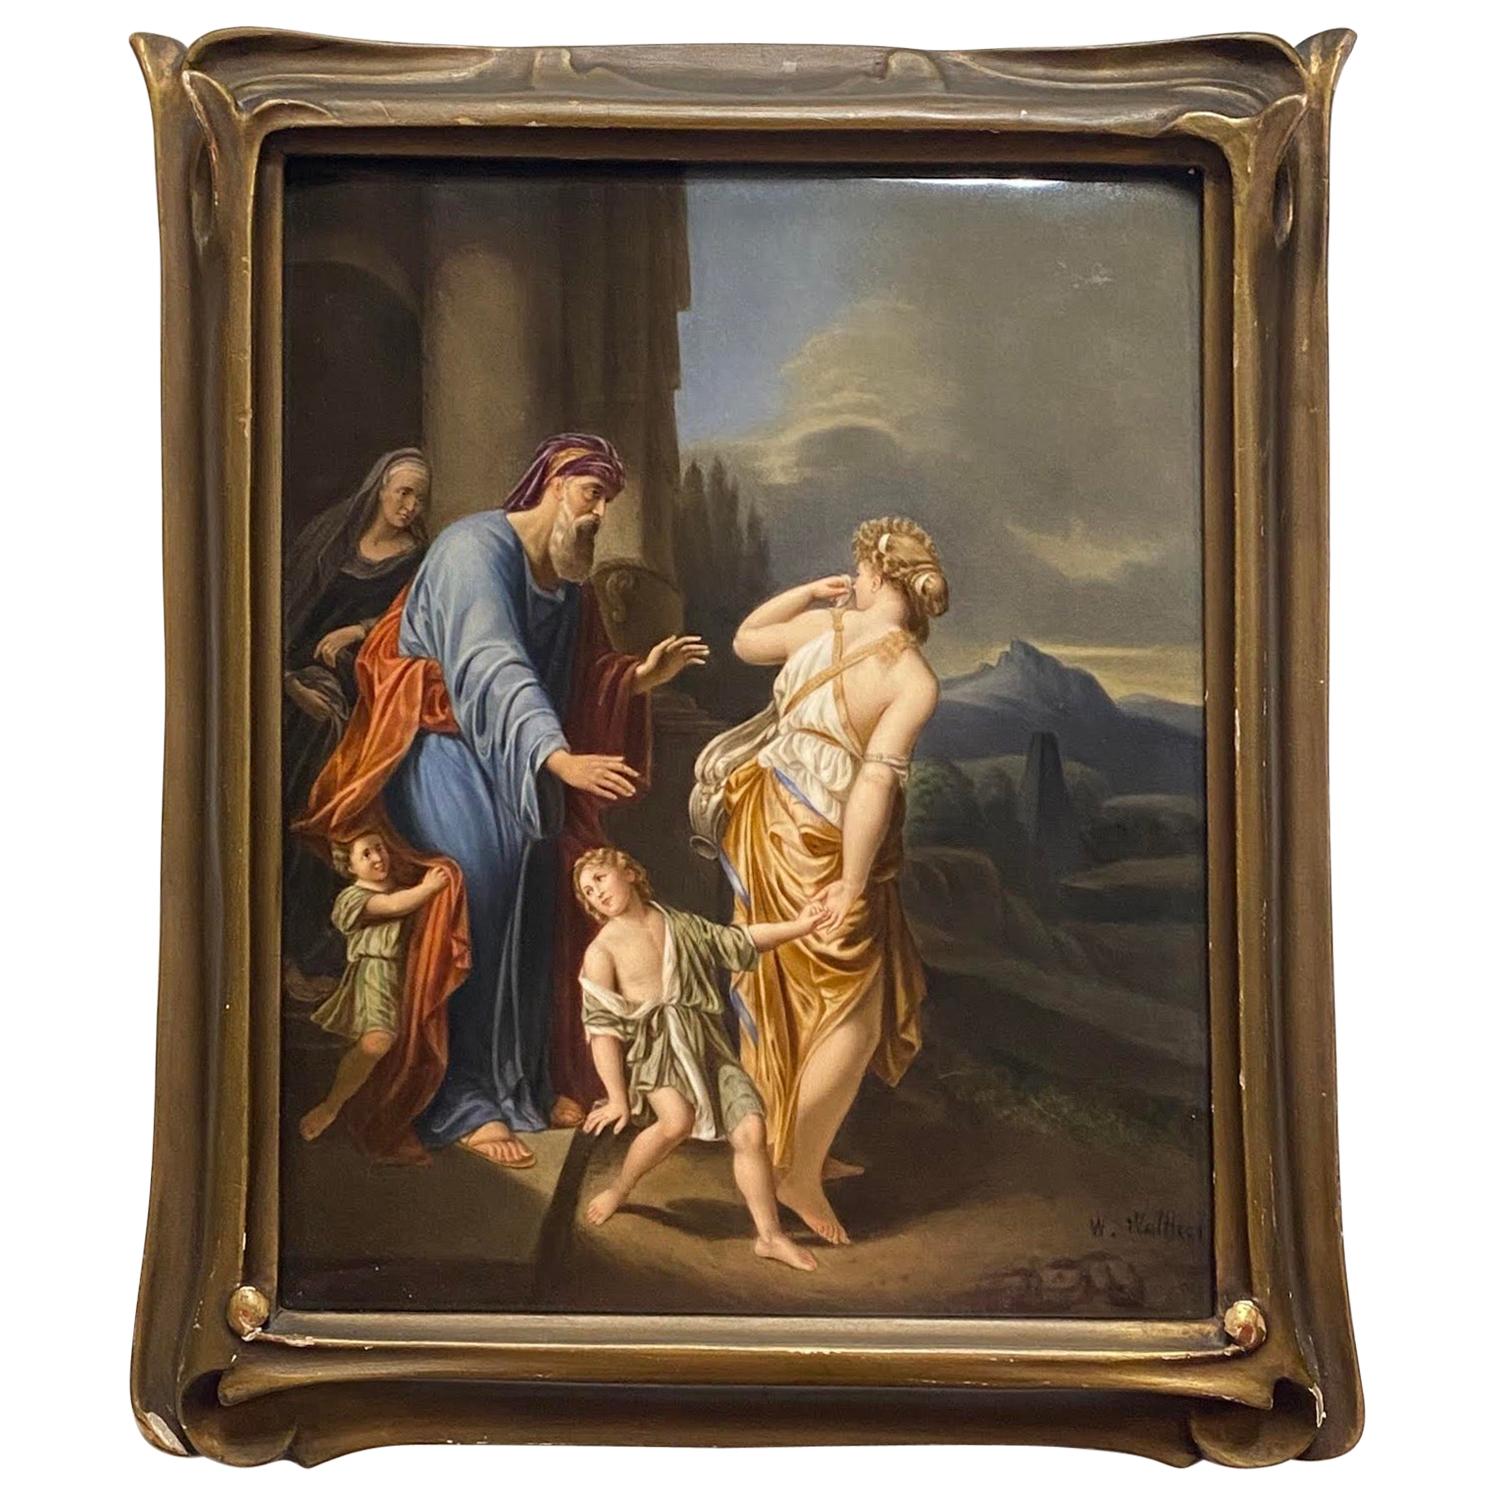 Berlin KPM Hand Painted Porcelain Plaque, 'The Expulsion of Hager'